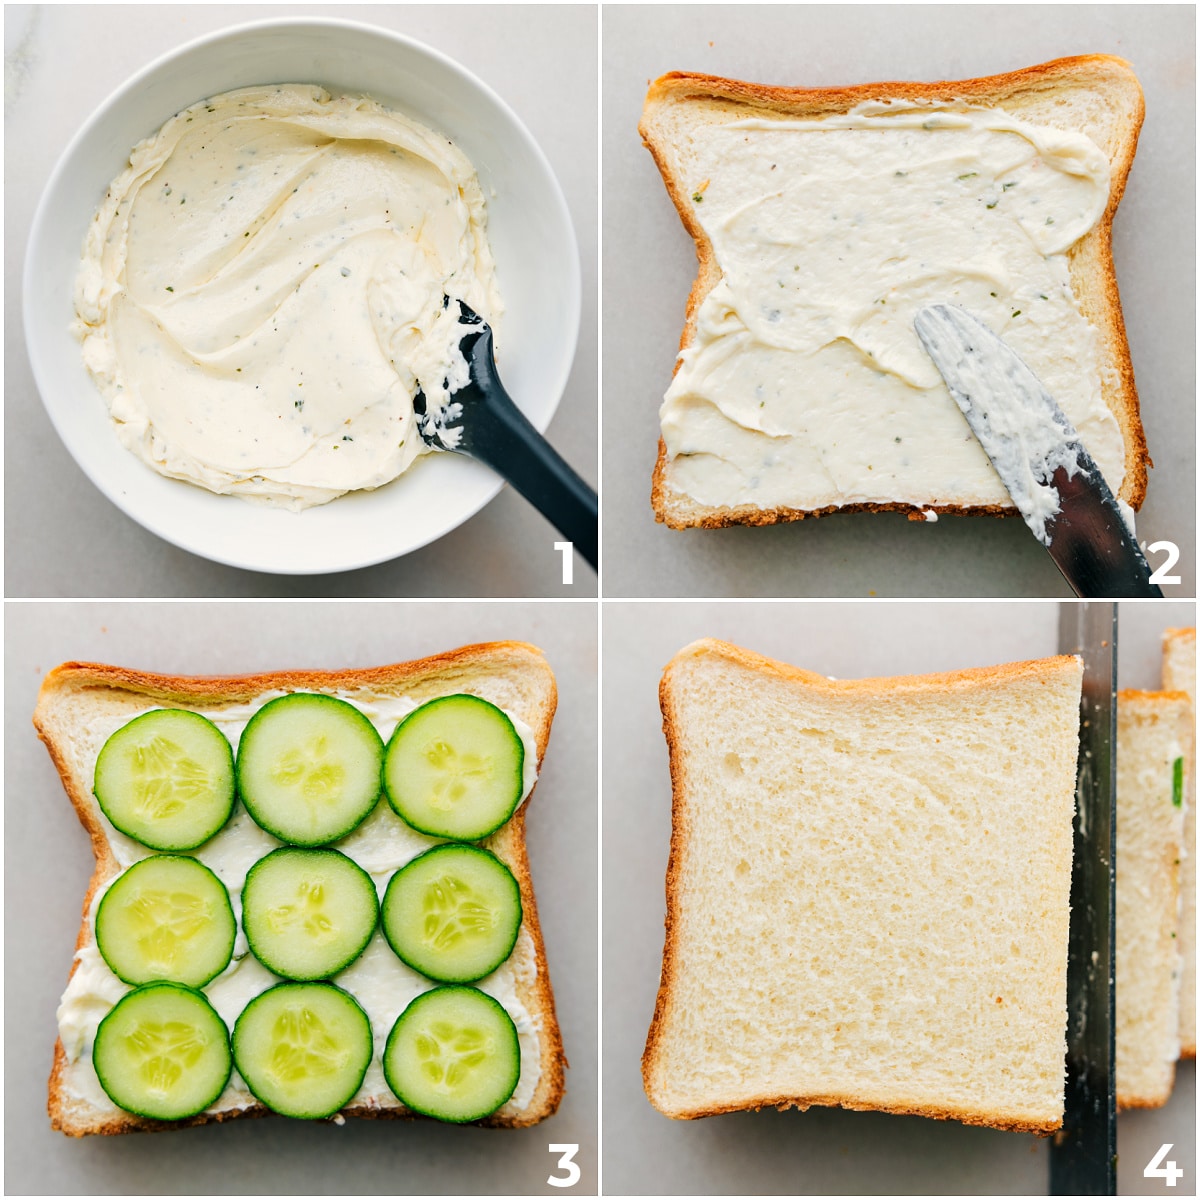 The mayo sauce and cucumbers being layered onto the bread for these cucumber sandwiches.